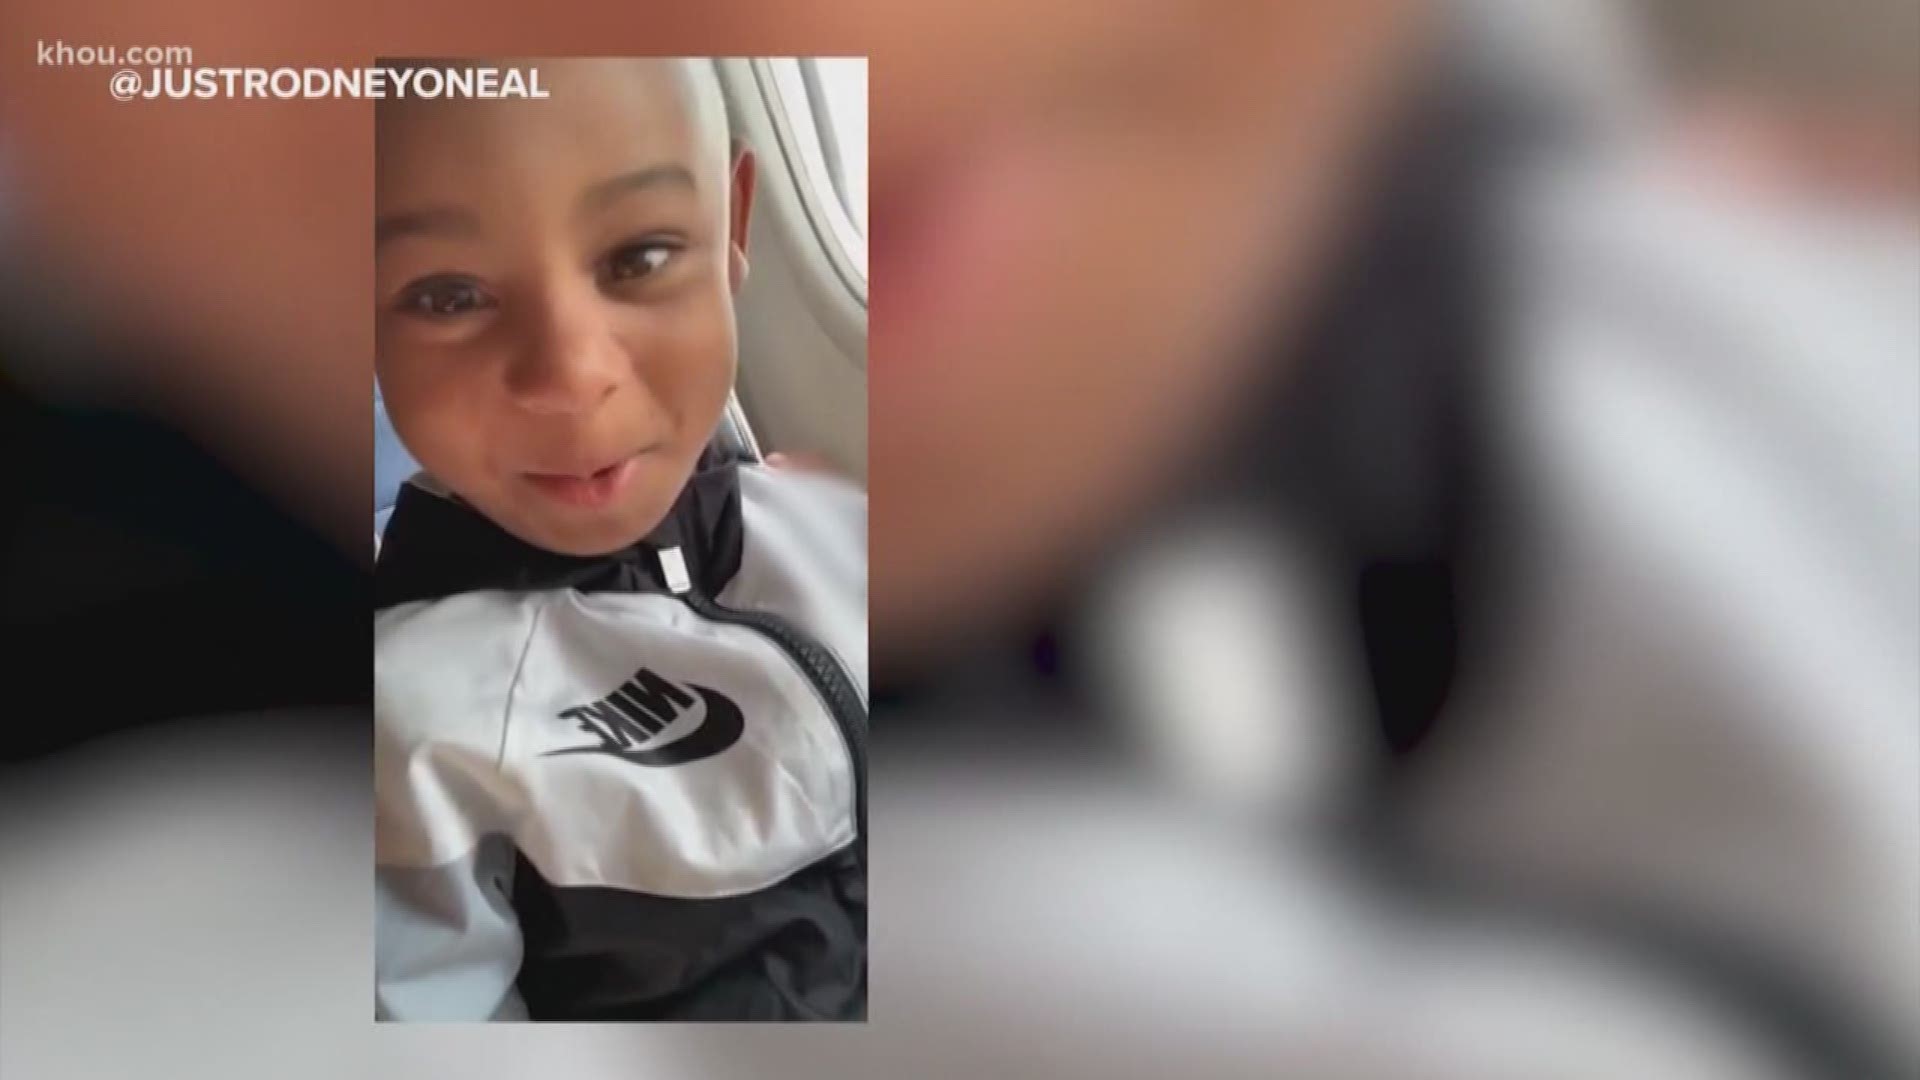 While on his very first flight, going from Orlando to Houston, 4-year-old Rodney Small noticed a woman’s bare foot on his armrest. His reaction…PRICELESS!